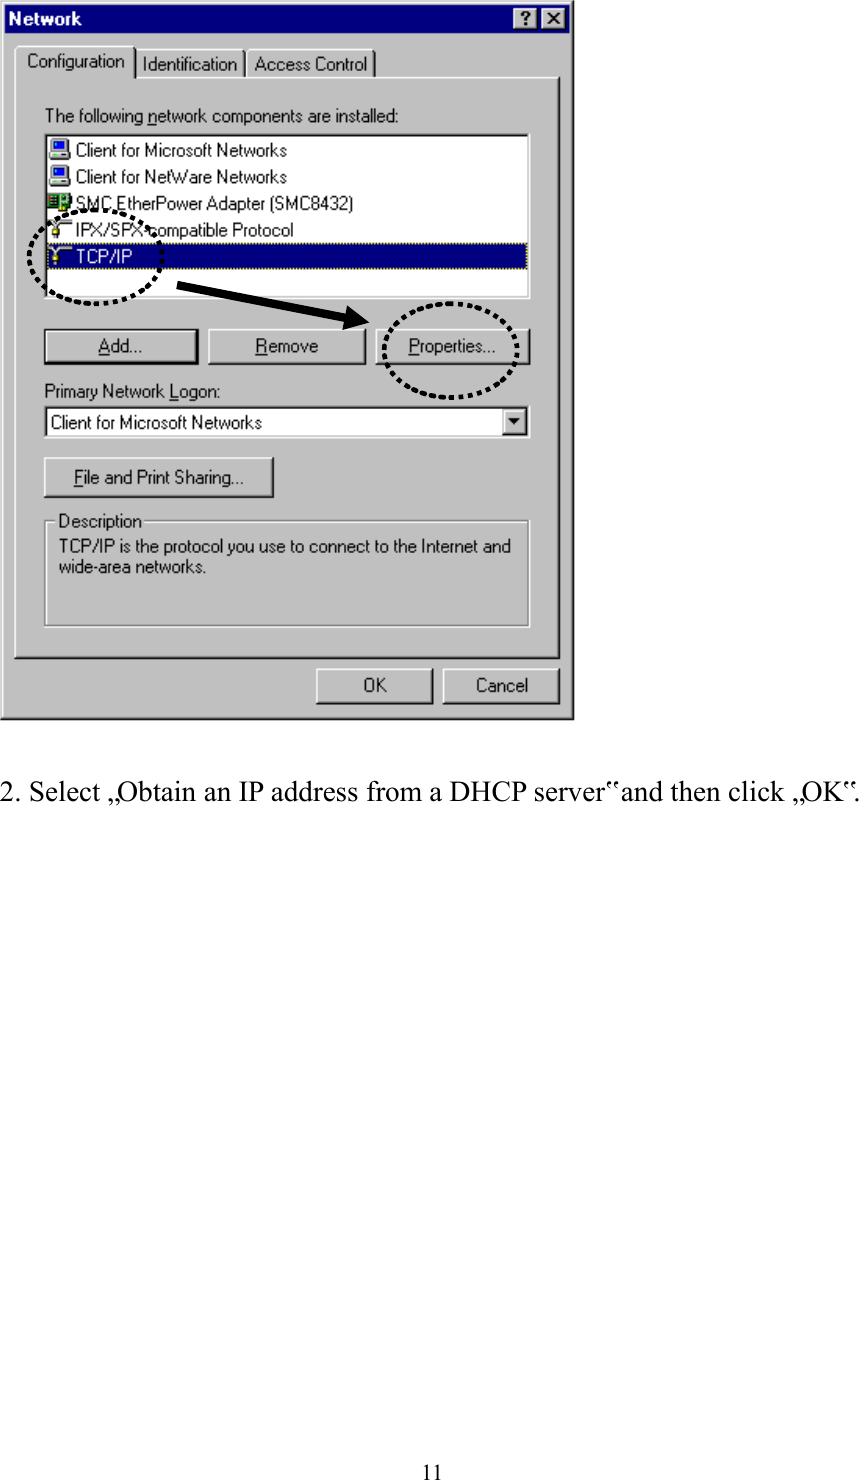  11   2. Select „Obtain an IP address from a DHCP server‟ and then click „OK‟.    